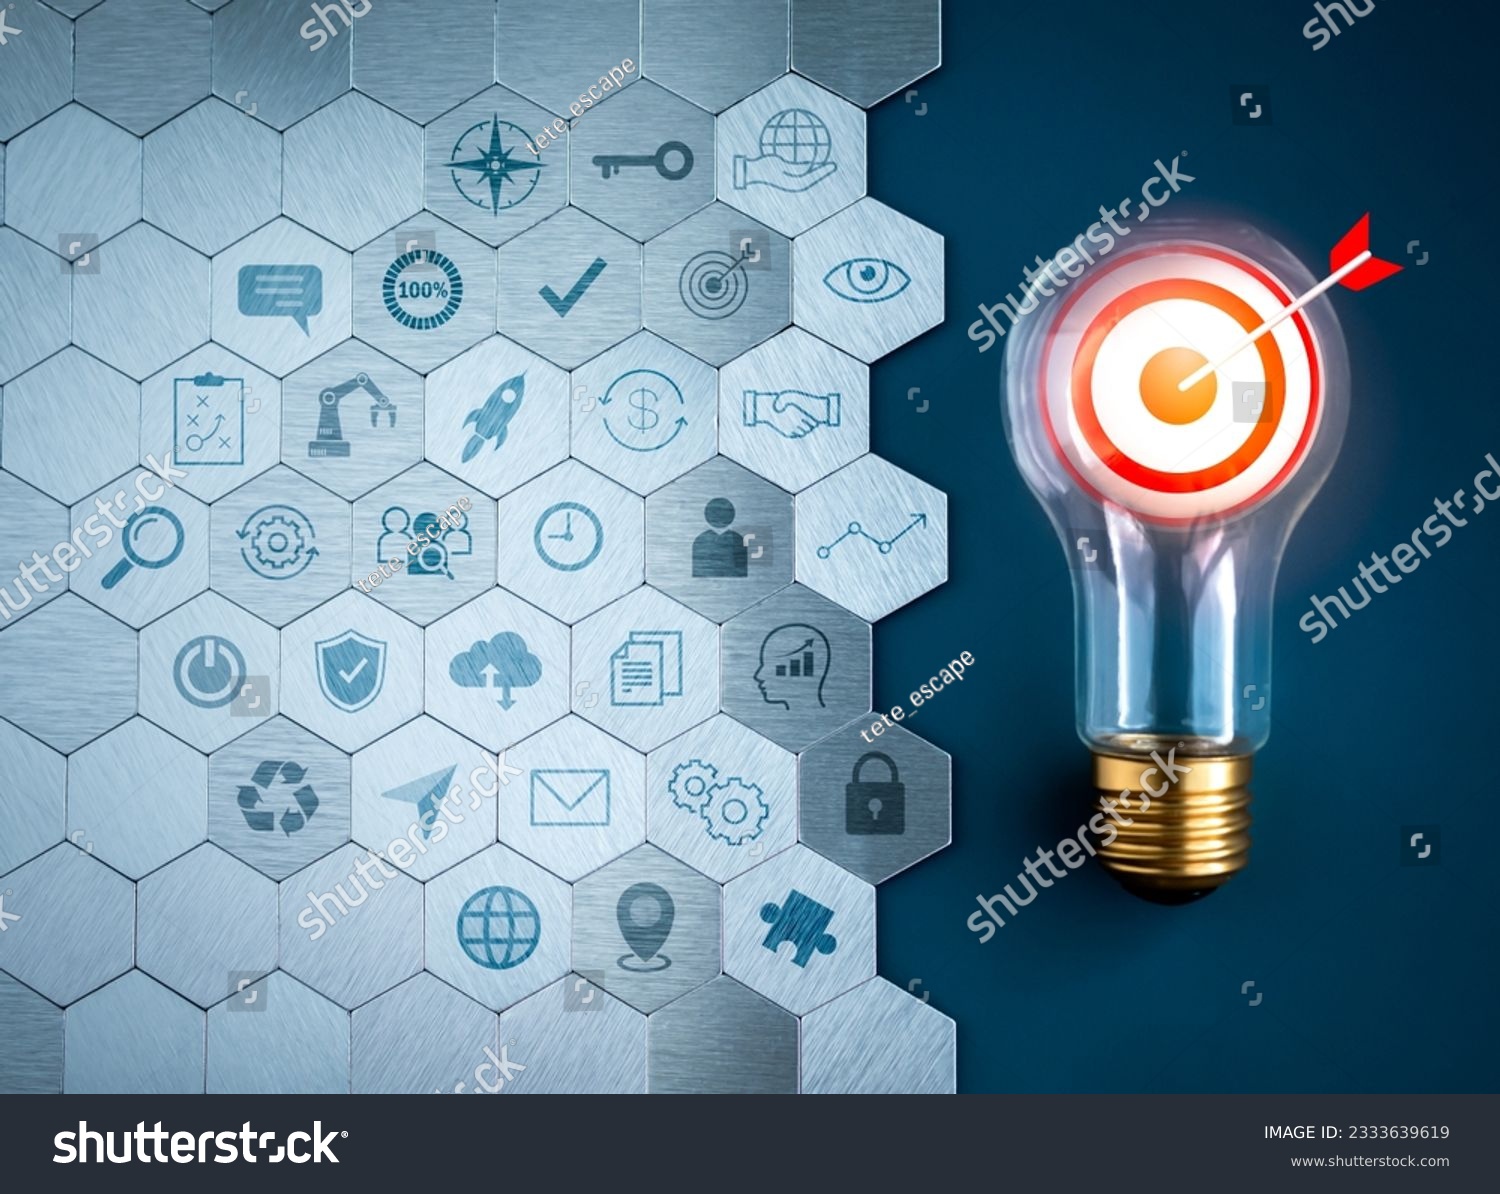 Digital marketing startup plan, business management action and development concepts. 3d target dart in creative idea light bulb and strategic element icons on hexagon pattern, blue background. #2333639619